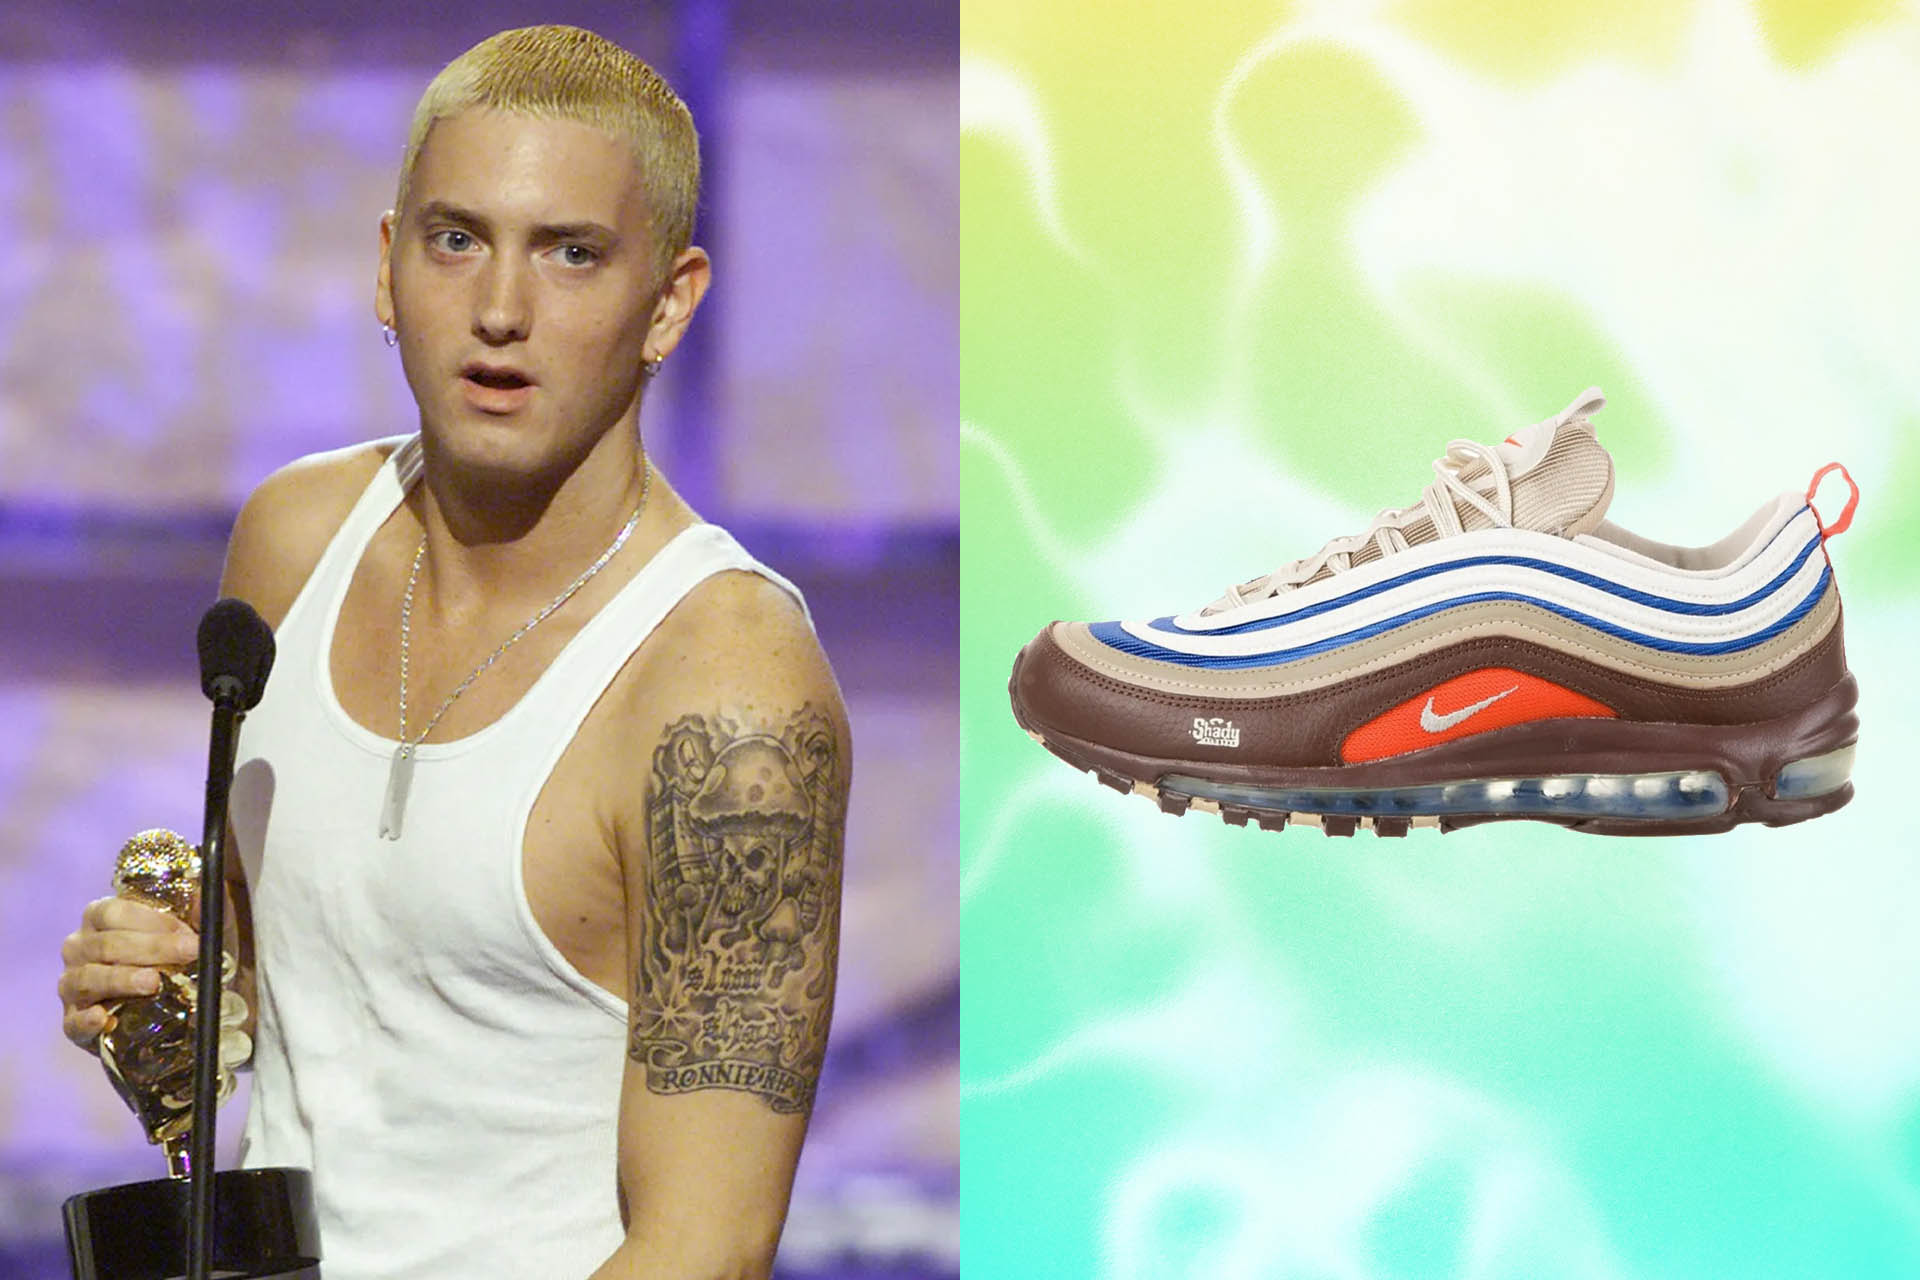 Here's Why These Ultra-Rare Eminem Nike Air Max 97s Cost $50,000 (Photos)